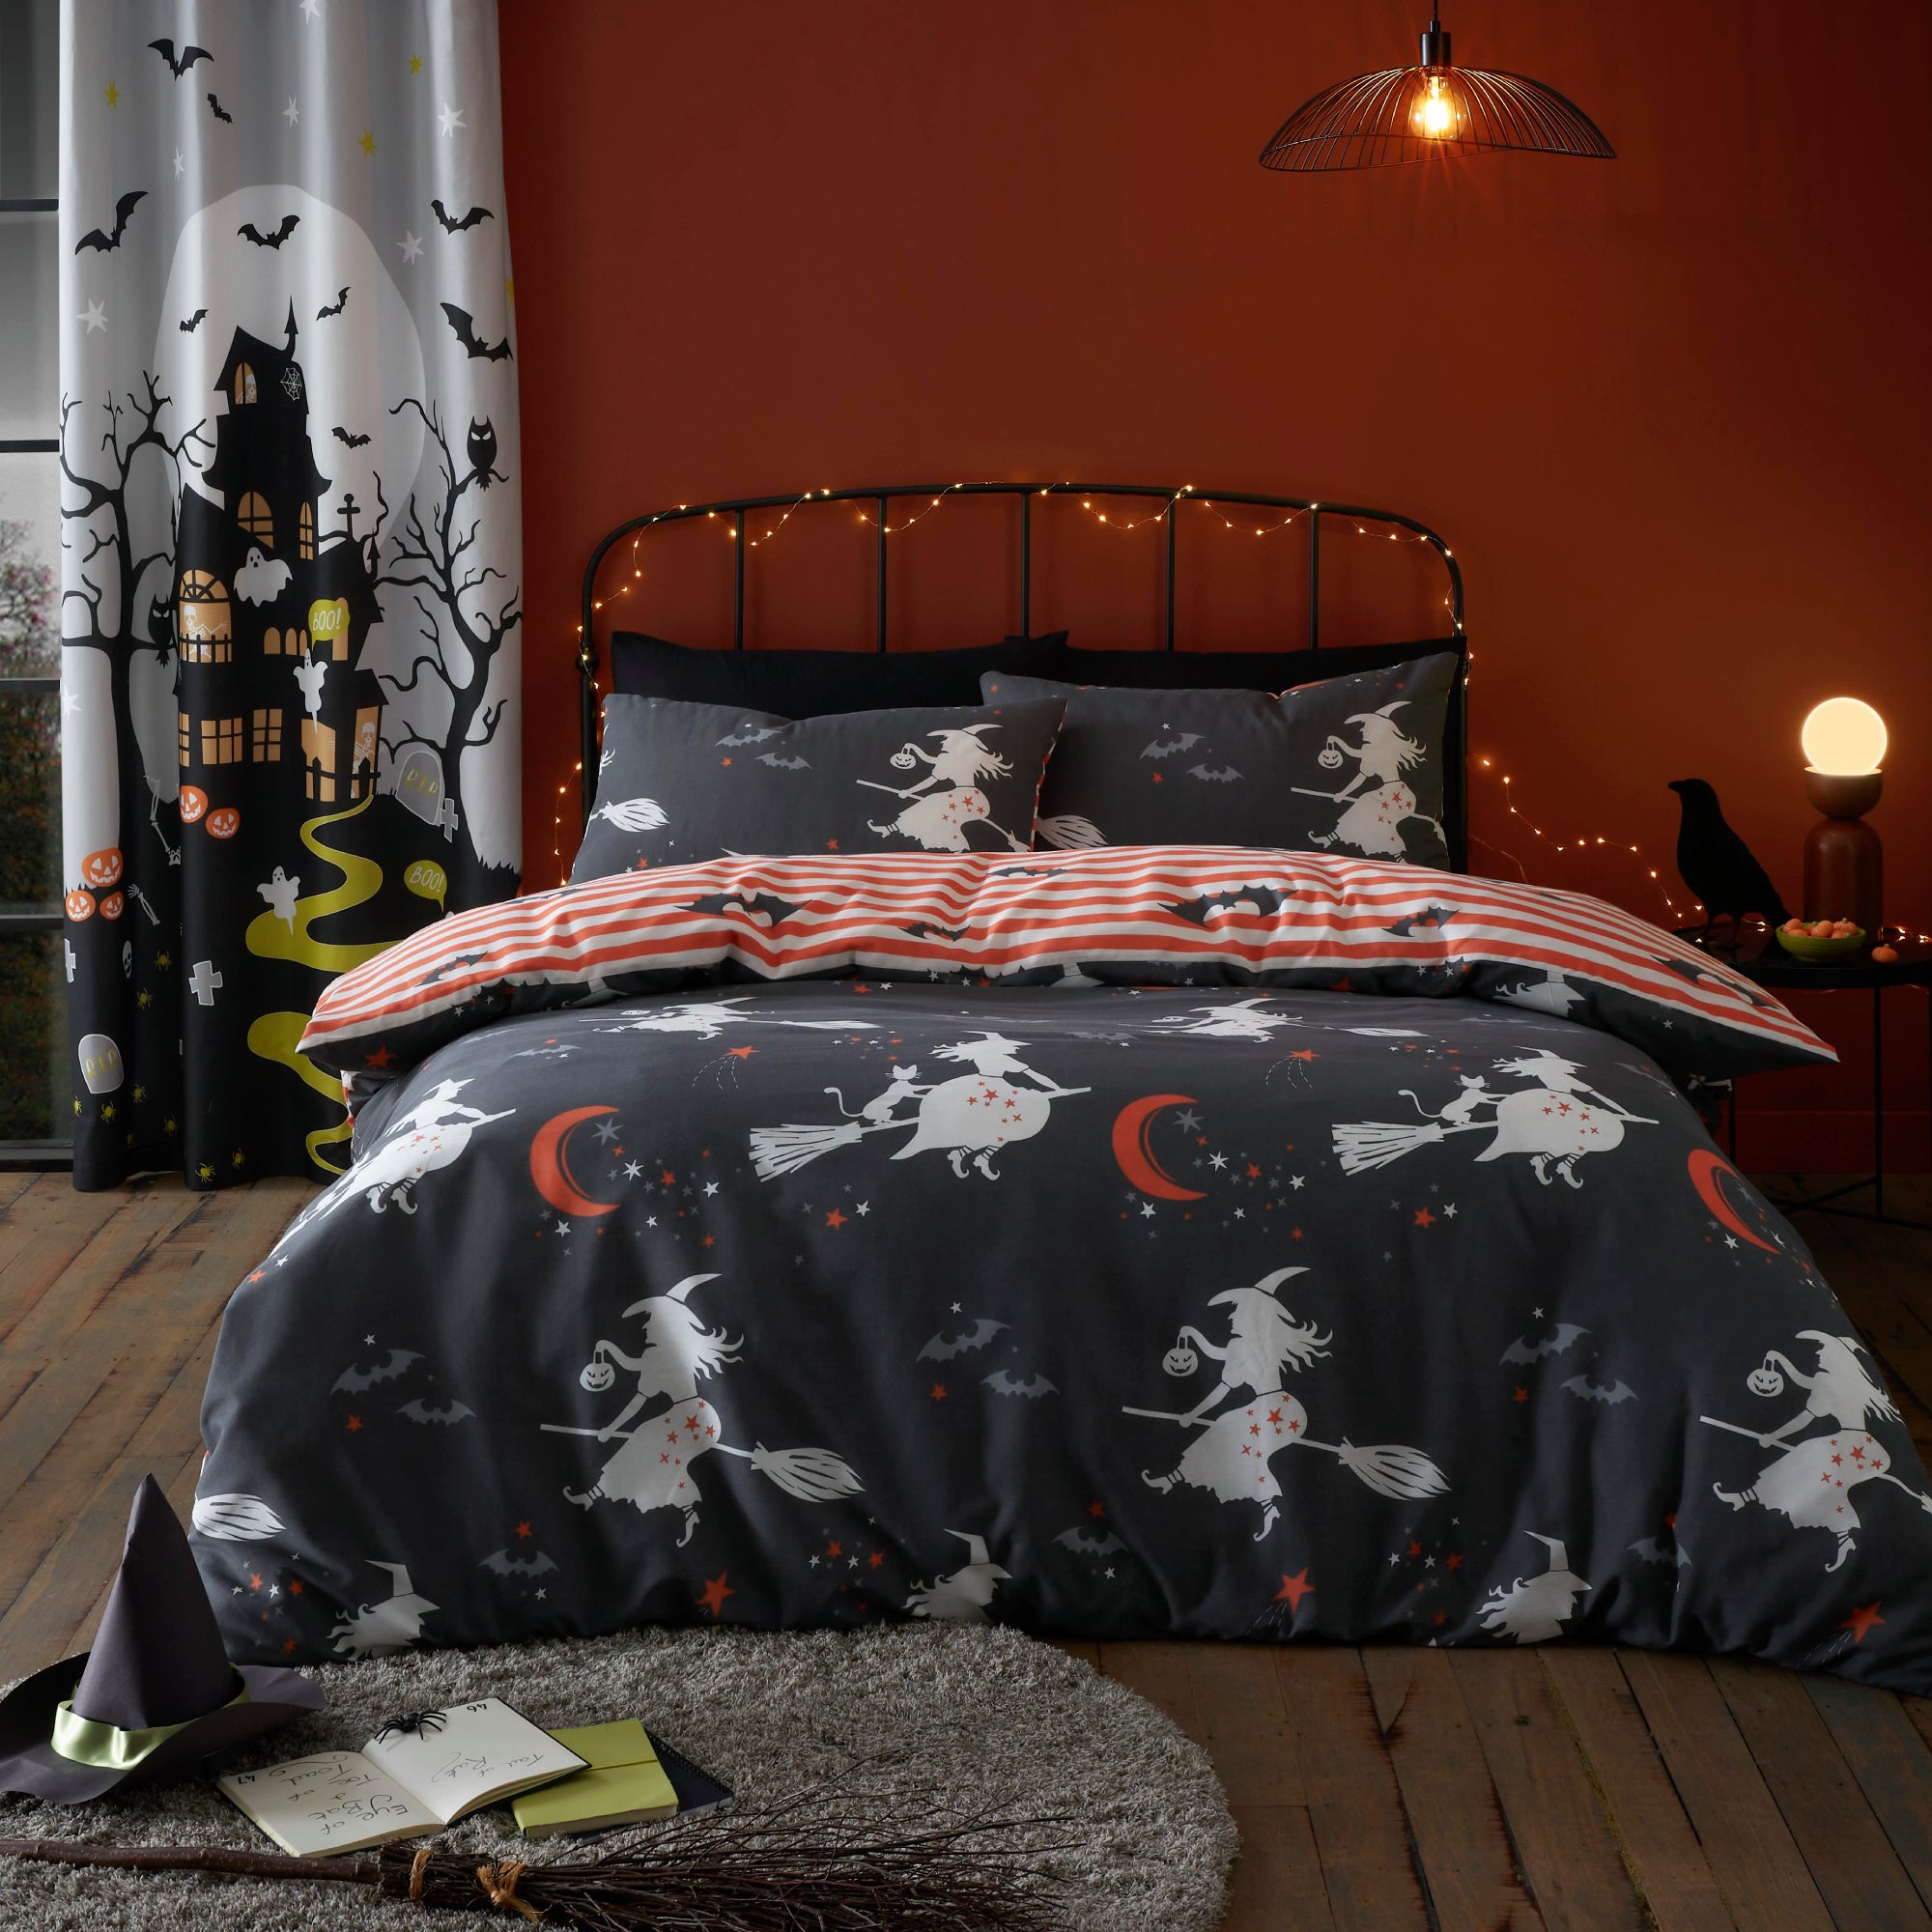 Duvet Cover Set Halloween Flying Witches by Bedlam in Charcoal